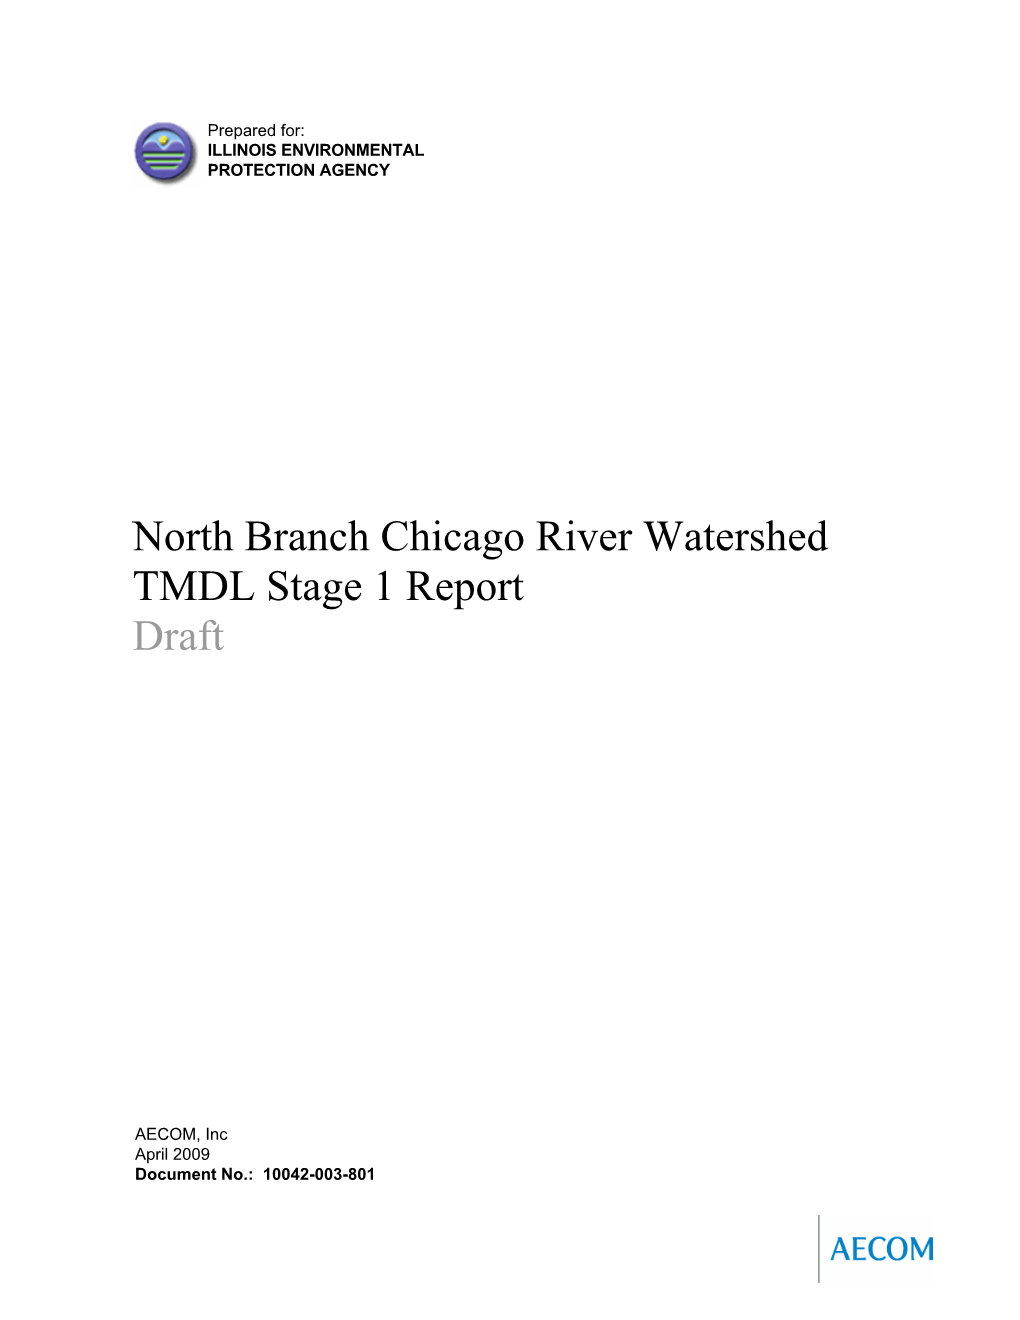 North Branch Chicago River Watershed TMDL Stage 1 Report Draft